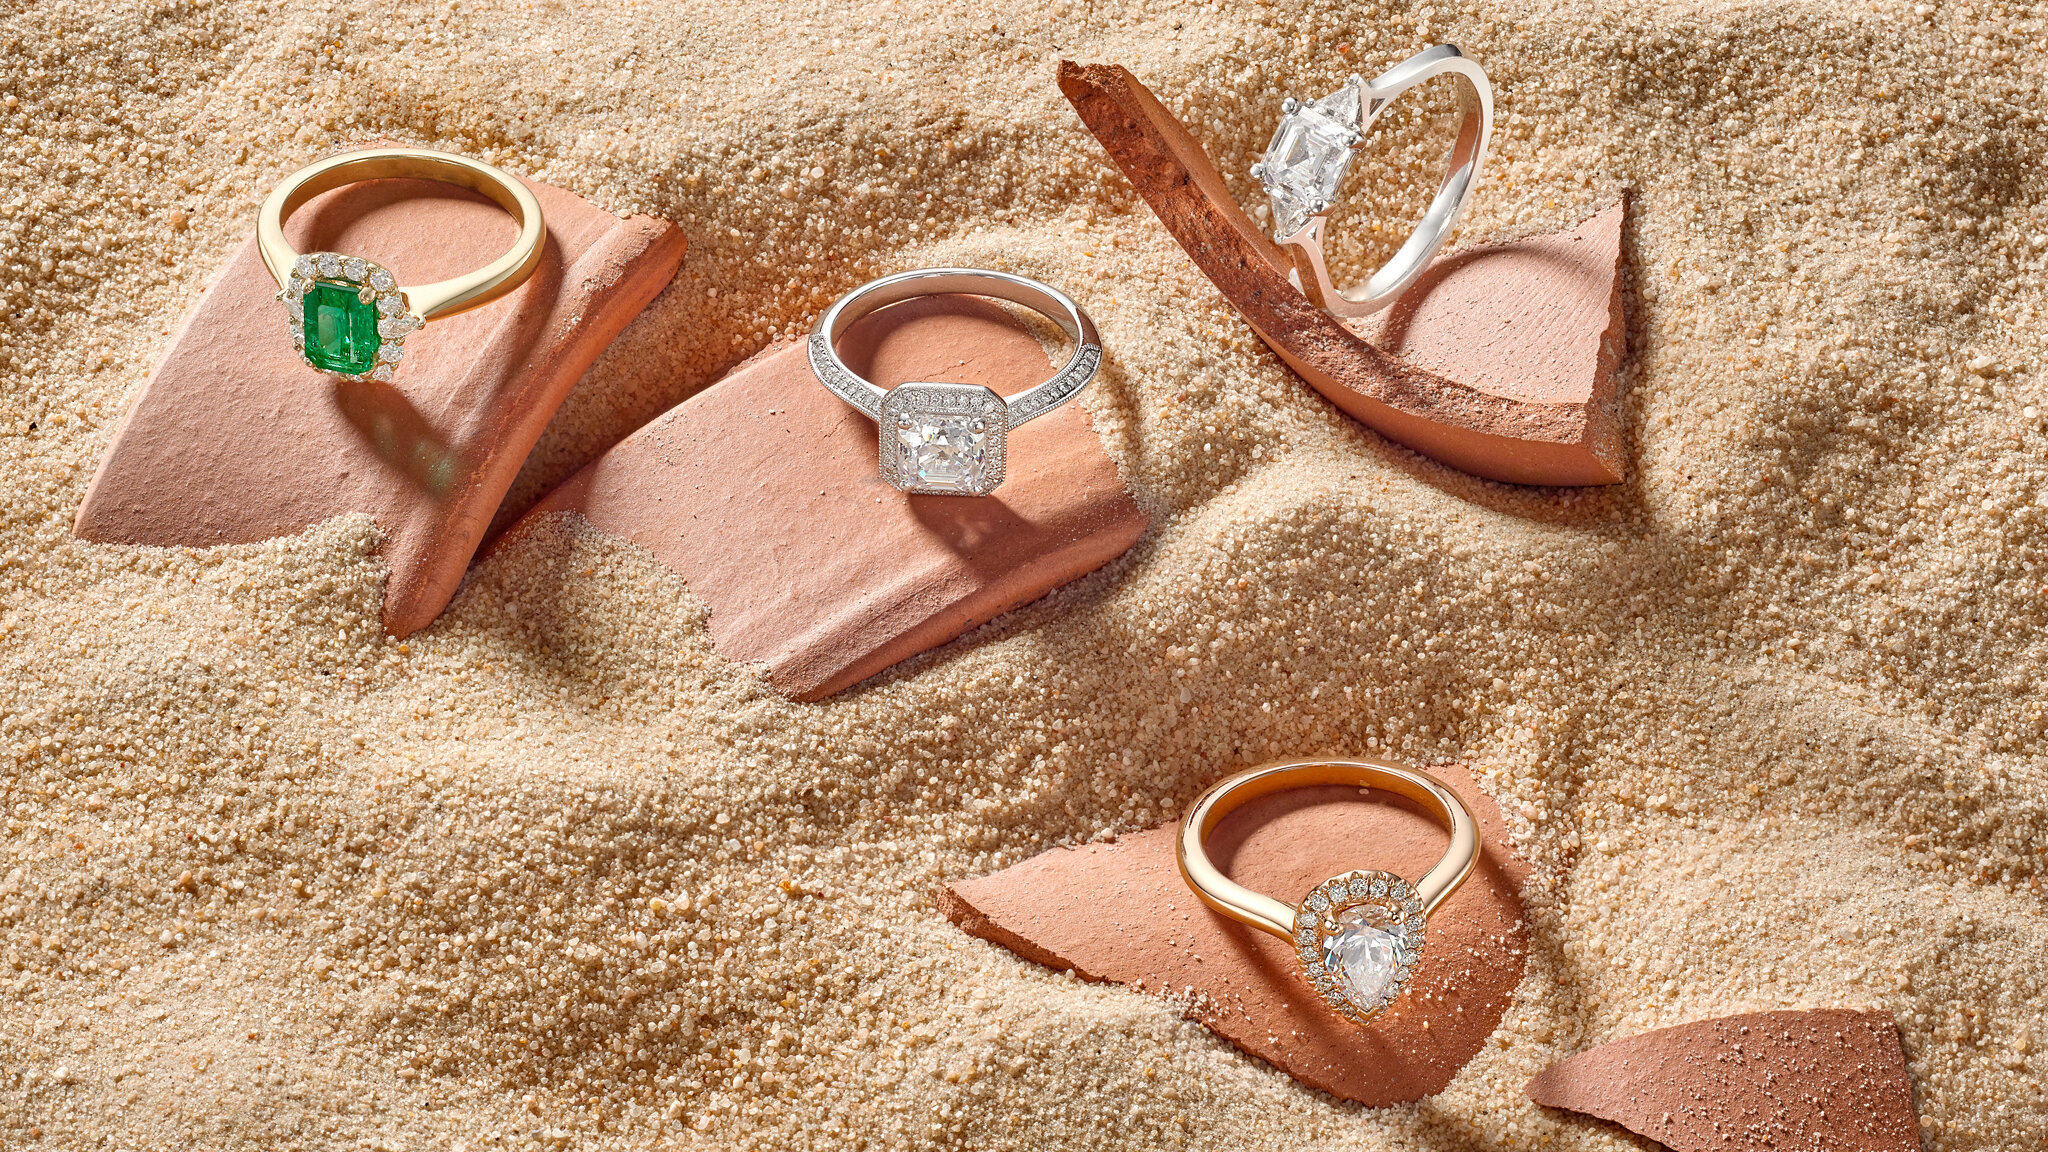 London+jewellery+photographer+rings+in+sand